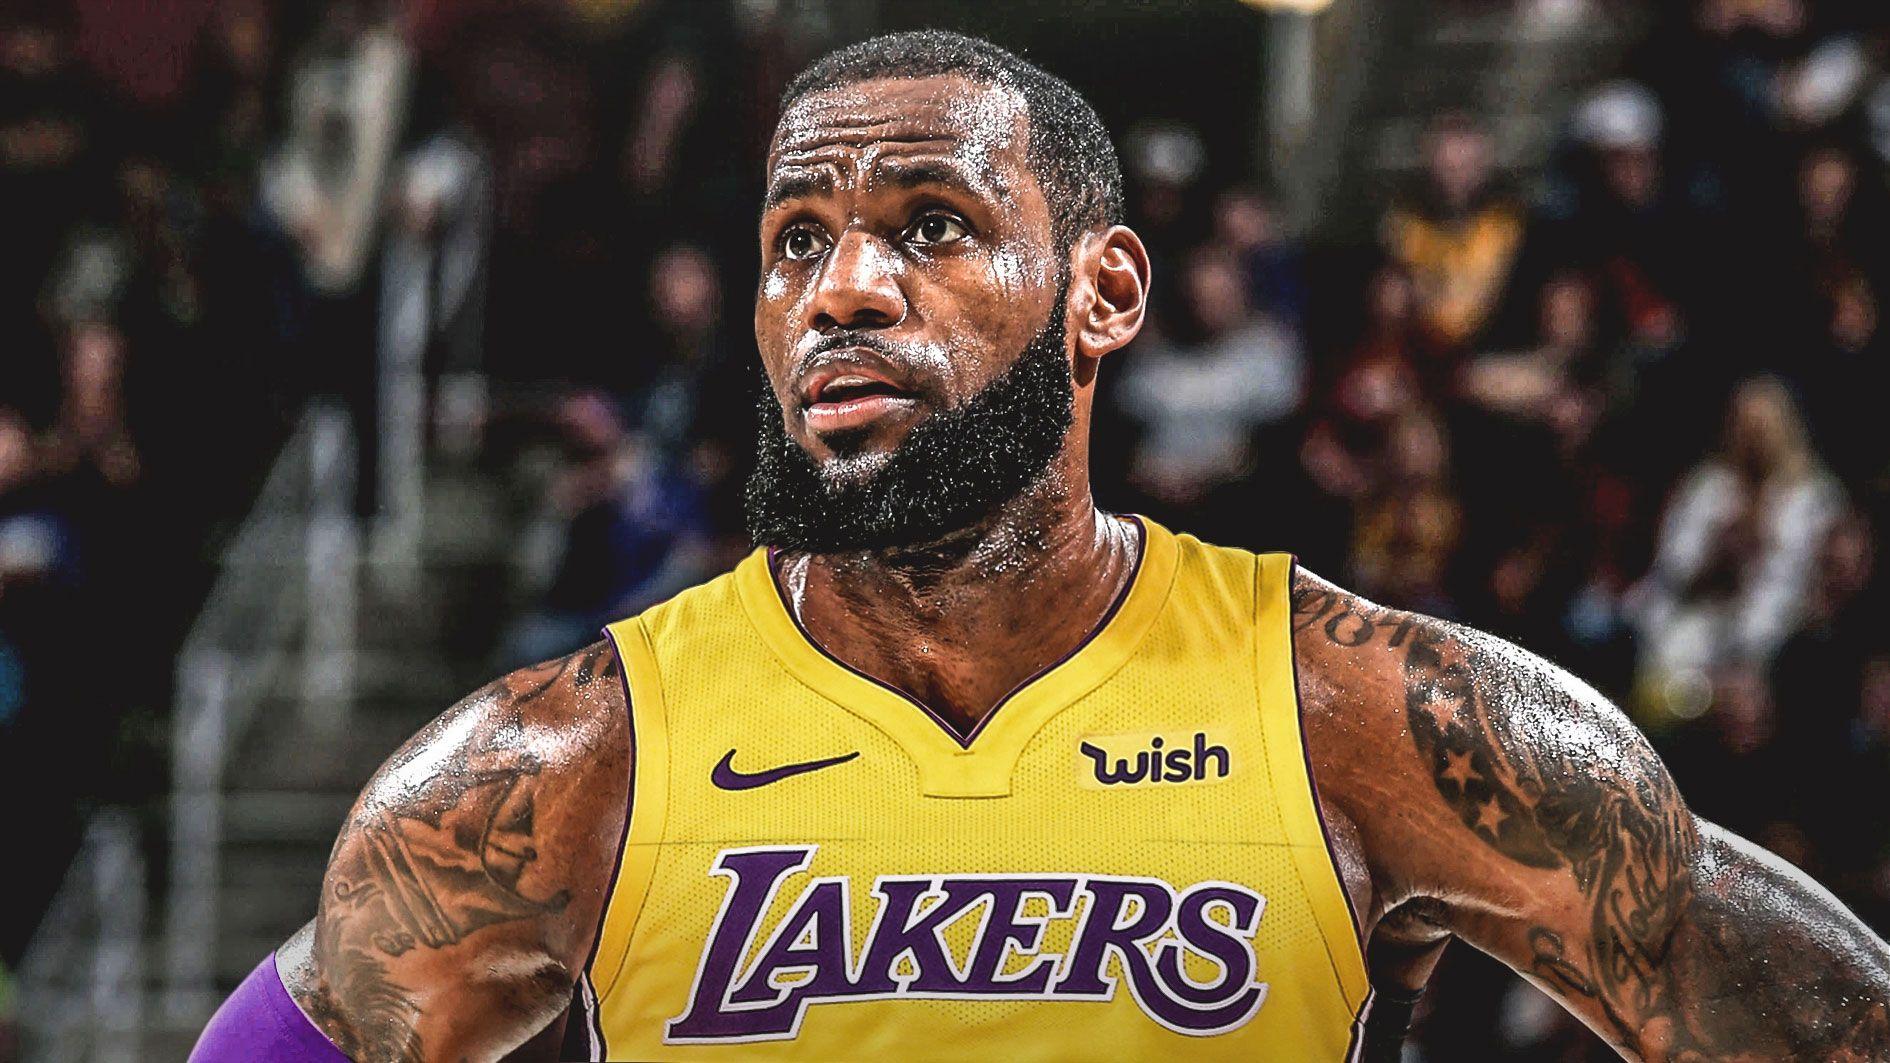 Lakers news: LeBron James to wear No. 23 jersey